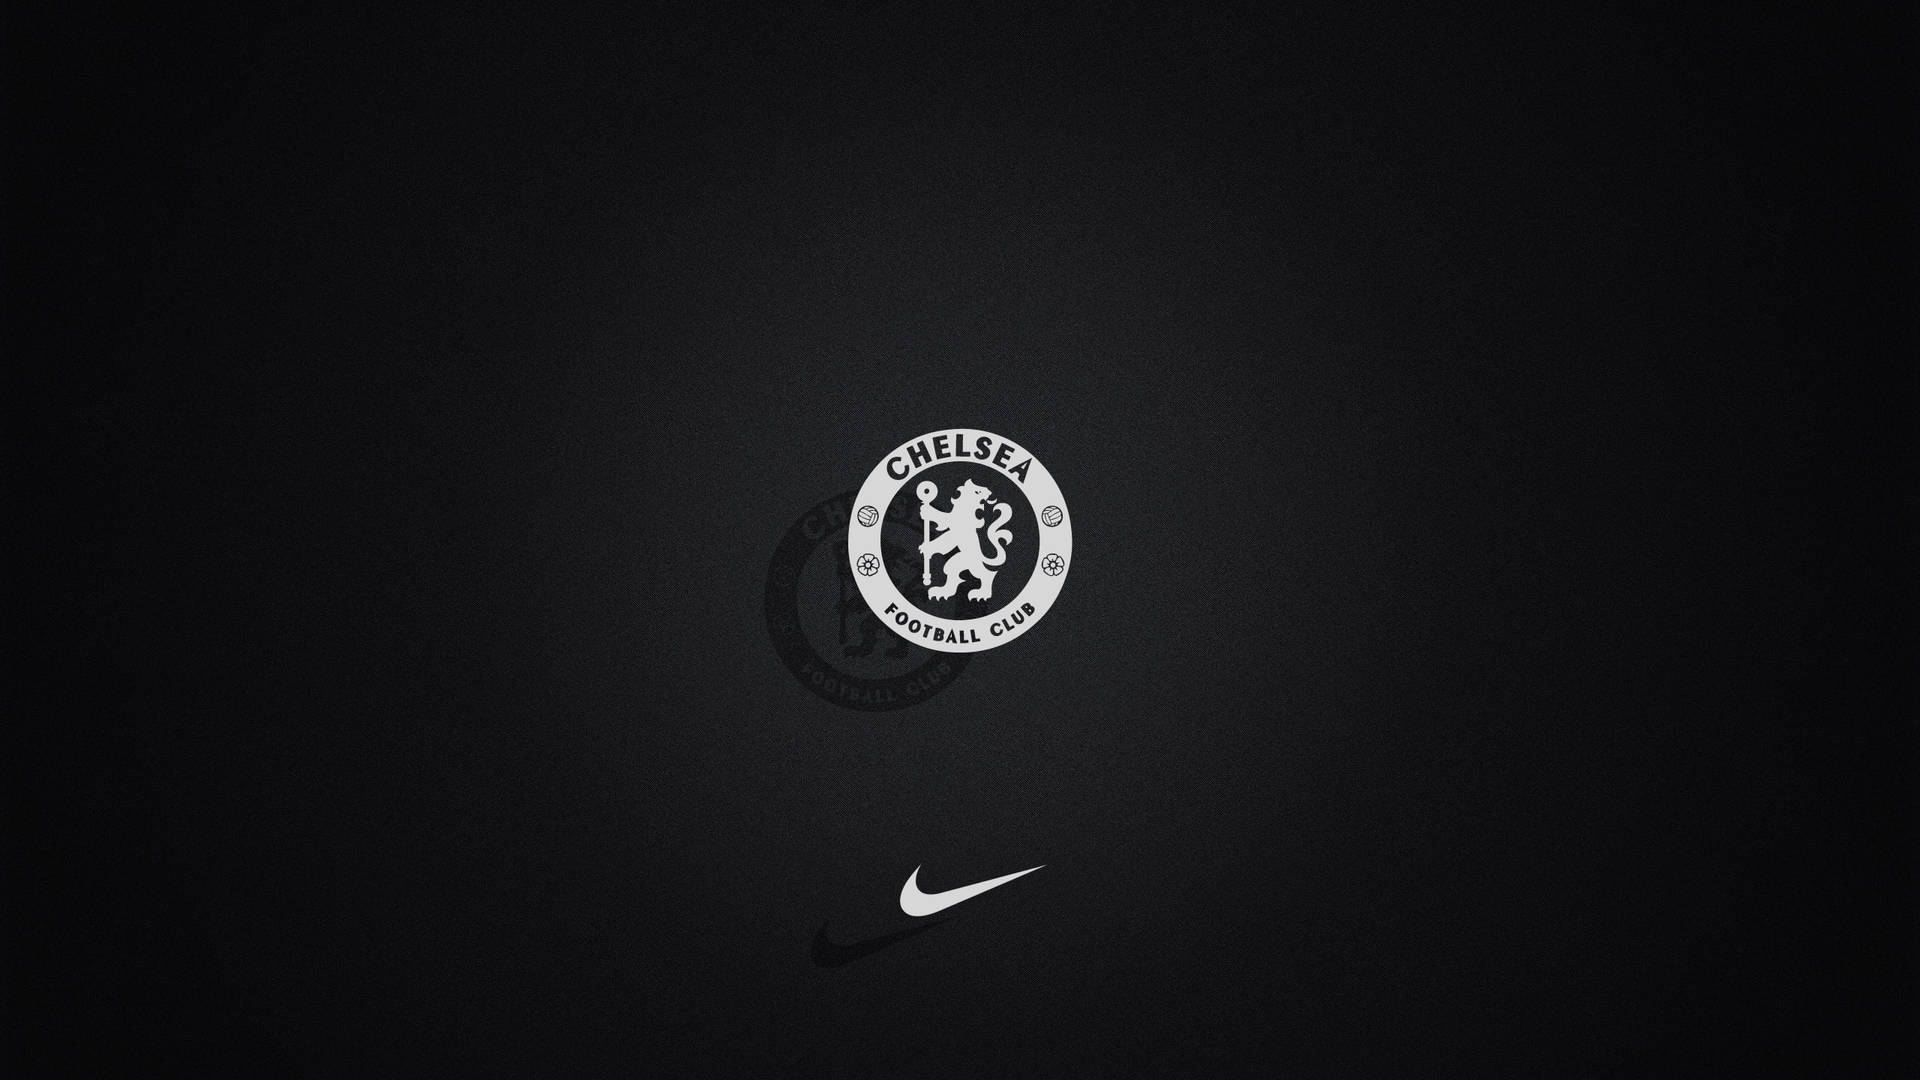 Top 999+ Chelsea Wallpaper Full HD, 4K✅Free to Use